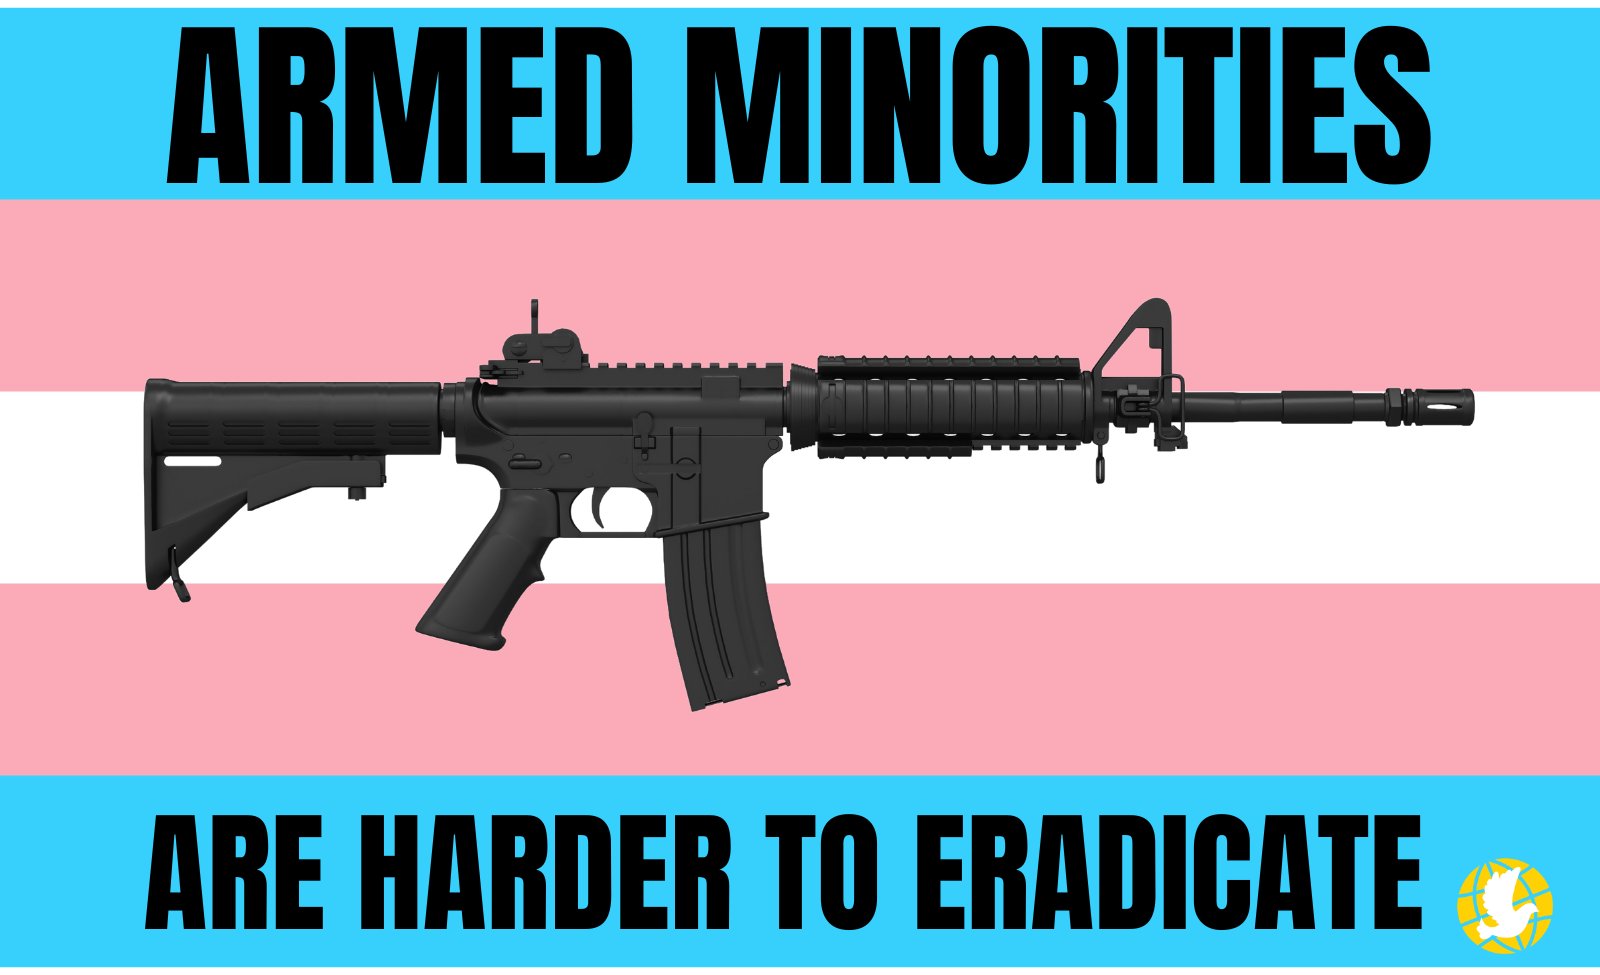 Transgender flag with a gun sillhouette overlayed on it. Text says: ARMED MINORITIES ARE HARDER TO ERADICATE